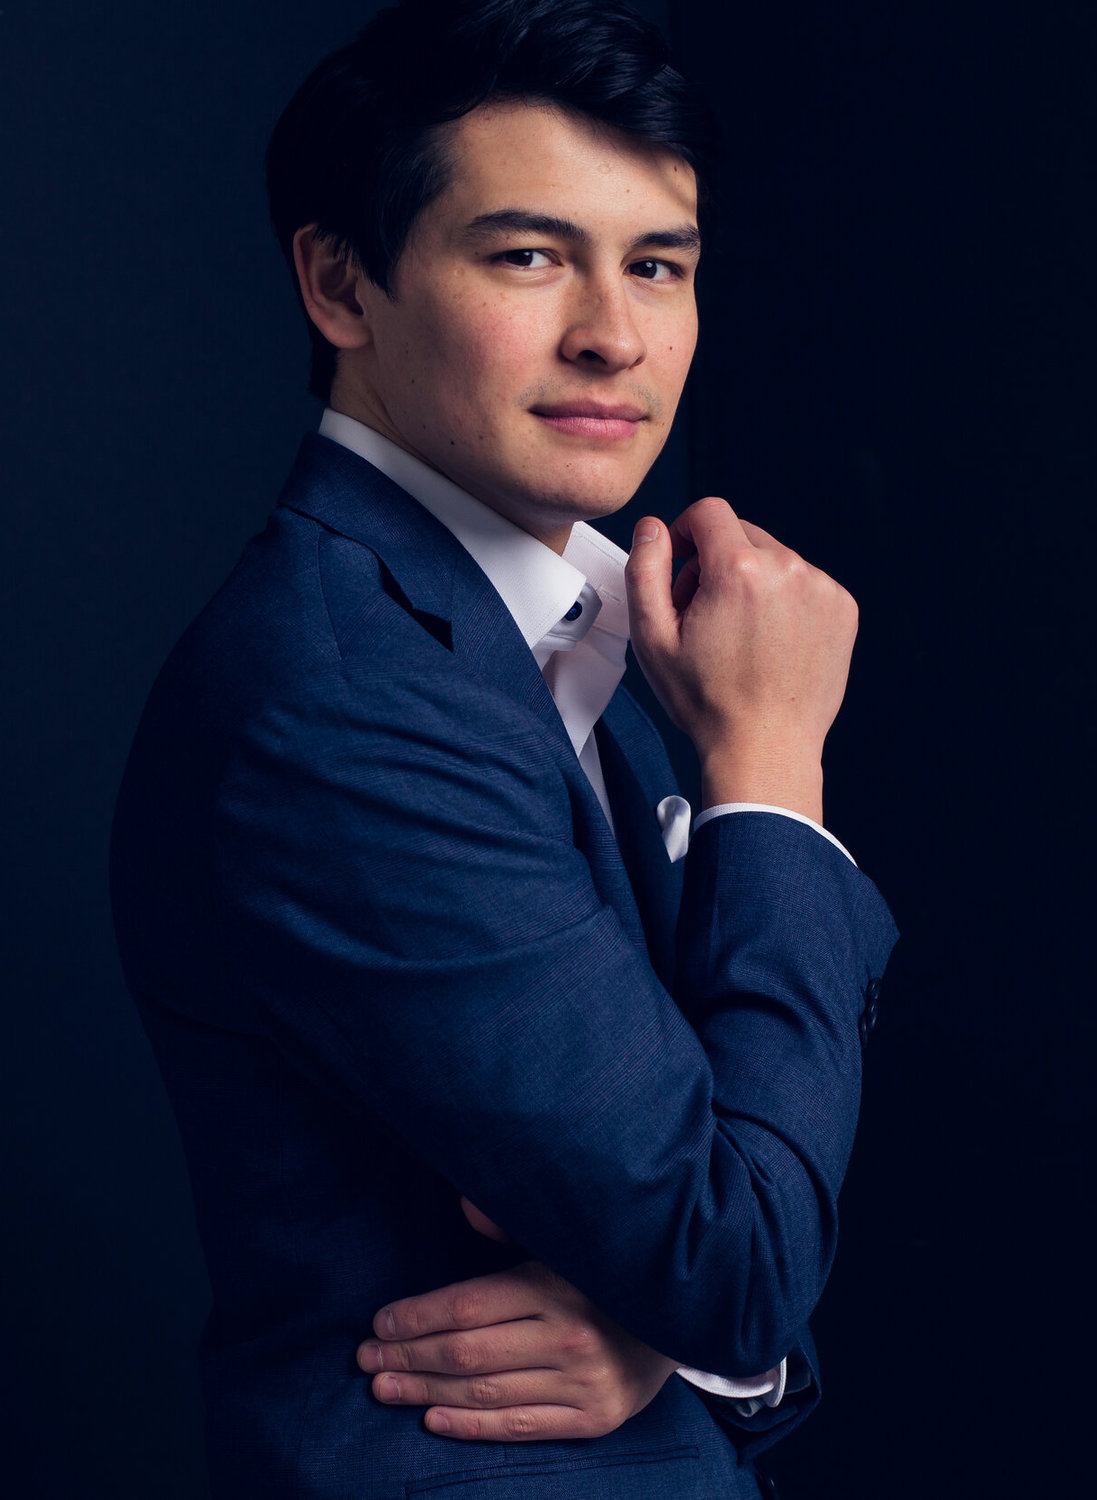 Alabama native Norman Huynh will conduct the Mobile Symphony Orchestra April 15-16.